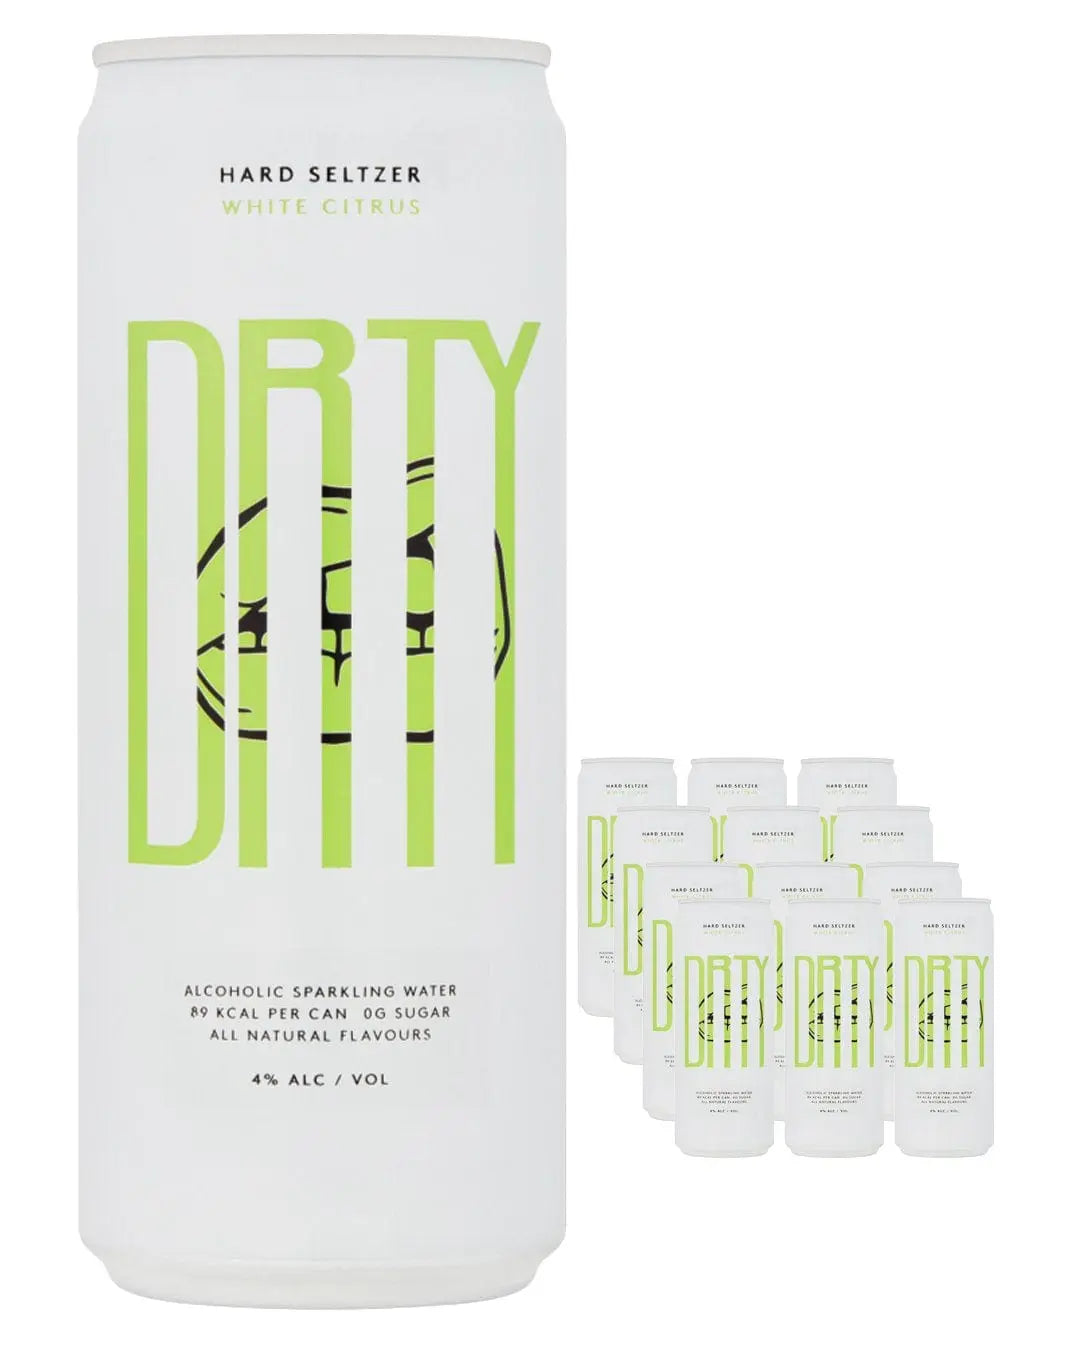 DRTY White Citrus Hard Seltzer Can Multipack, 12 x 330 ml Ready Made Cocktails